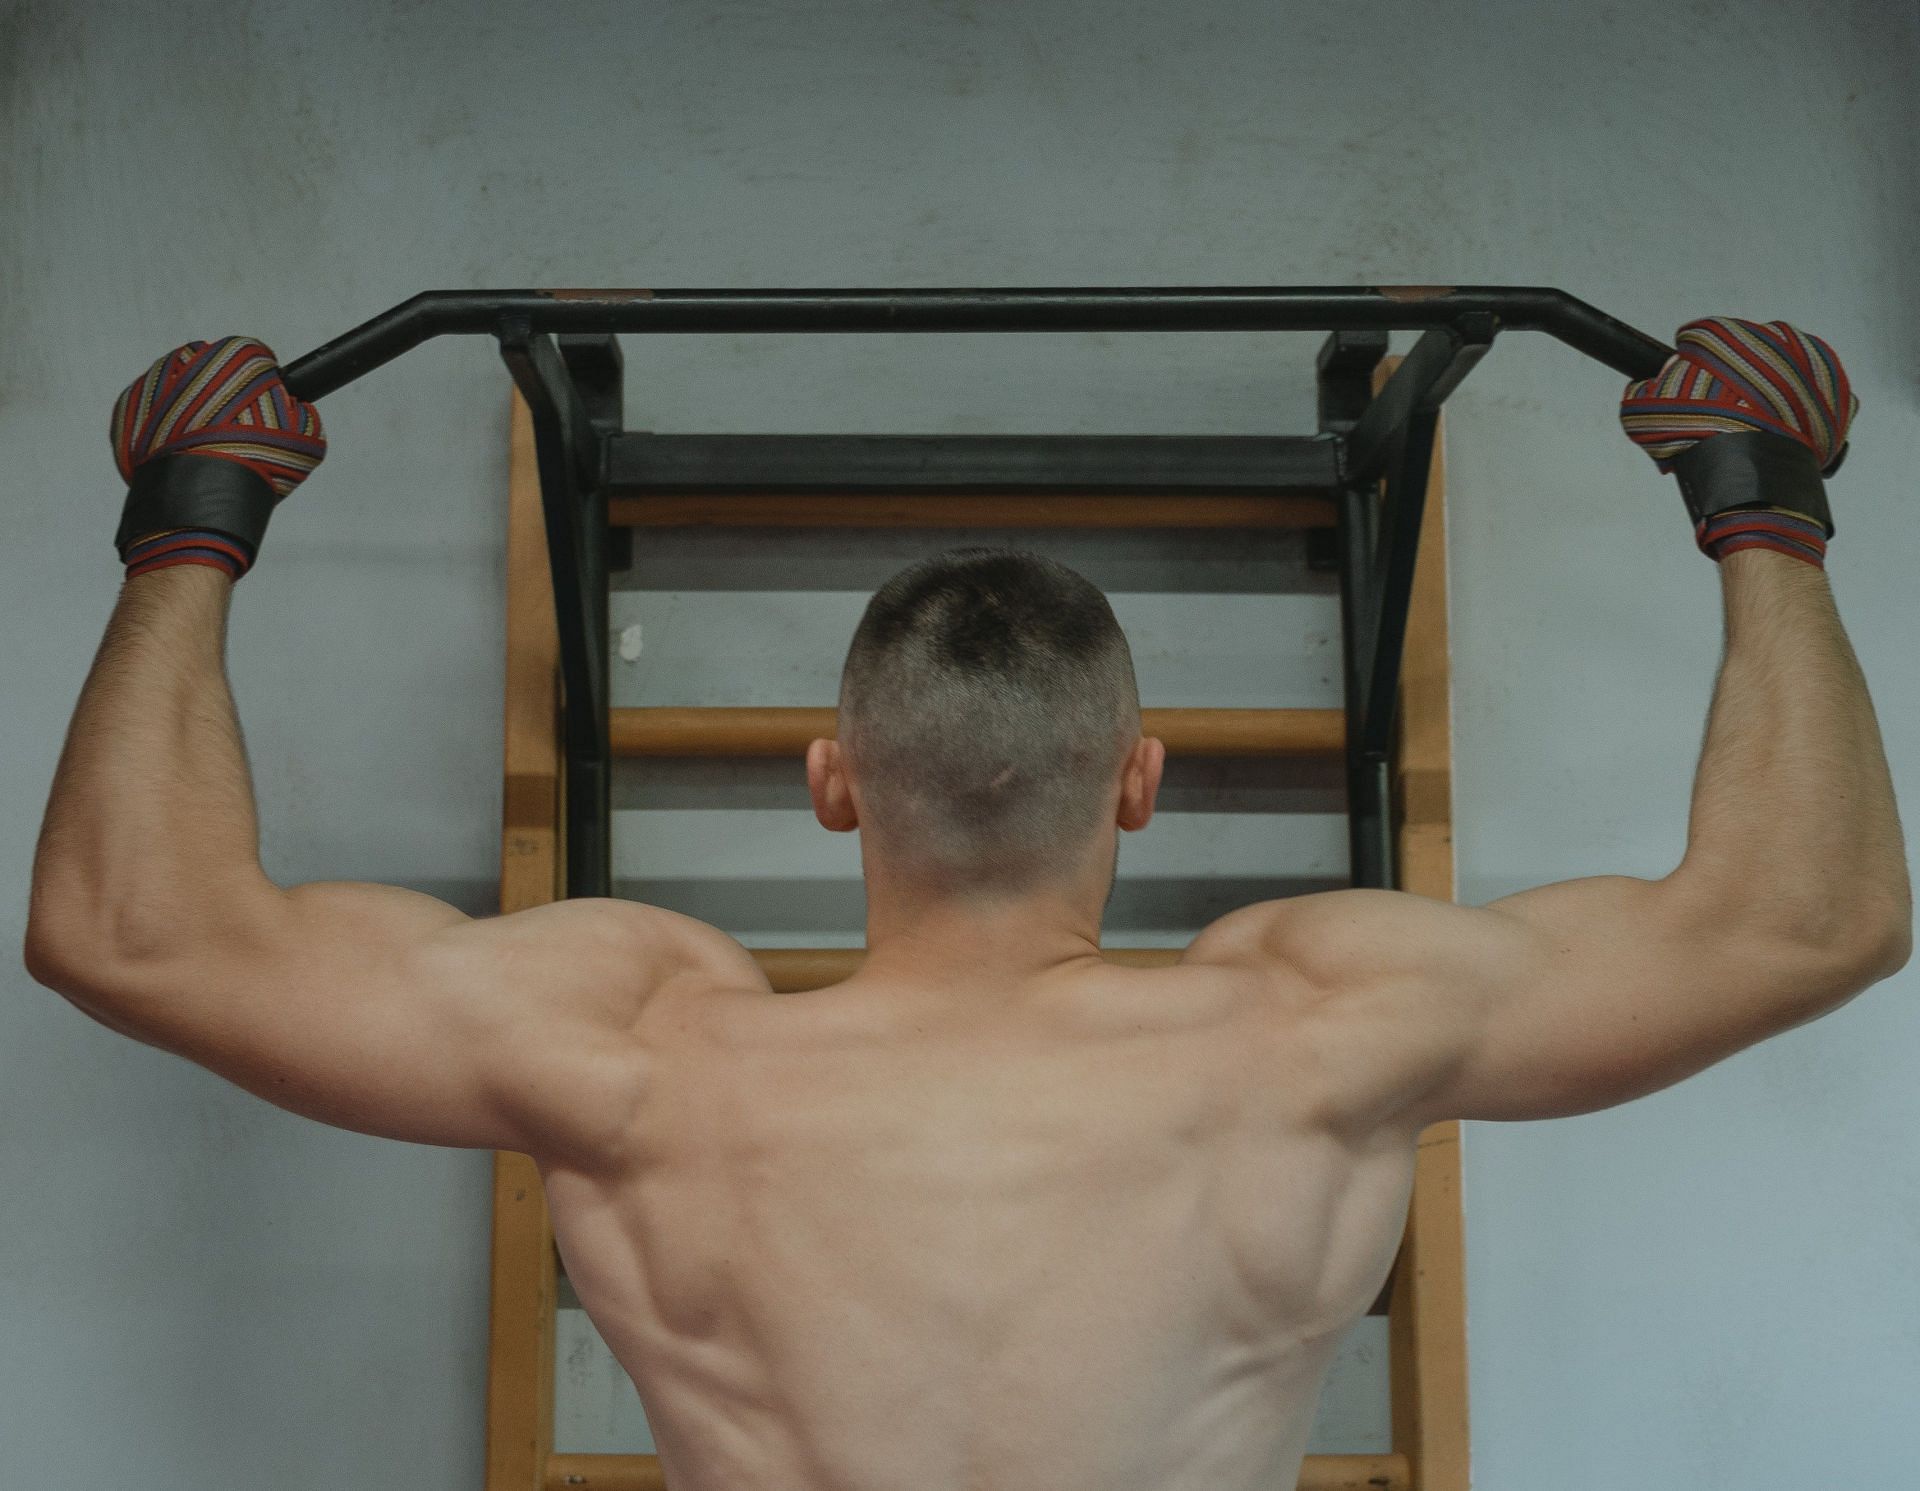 HOW TO GET BETTER AT PULL-UPS